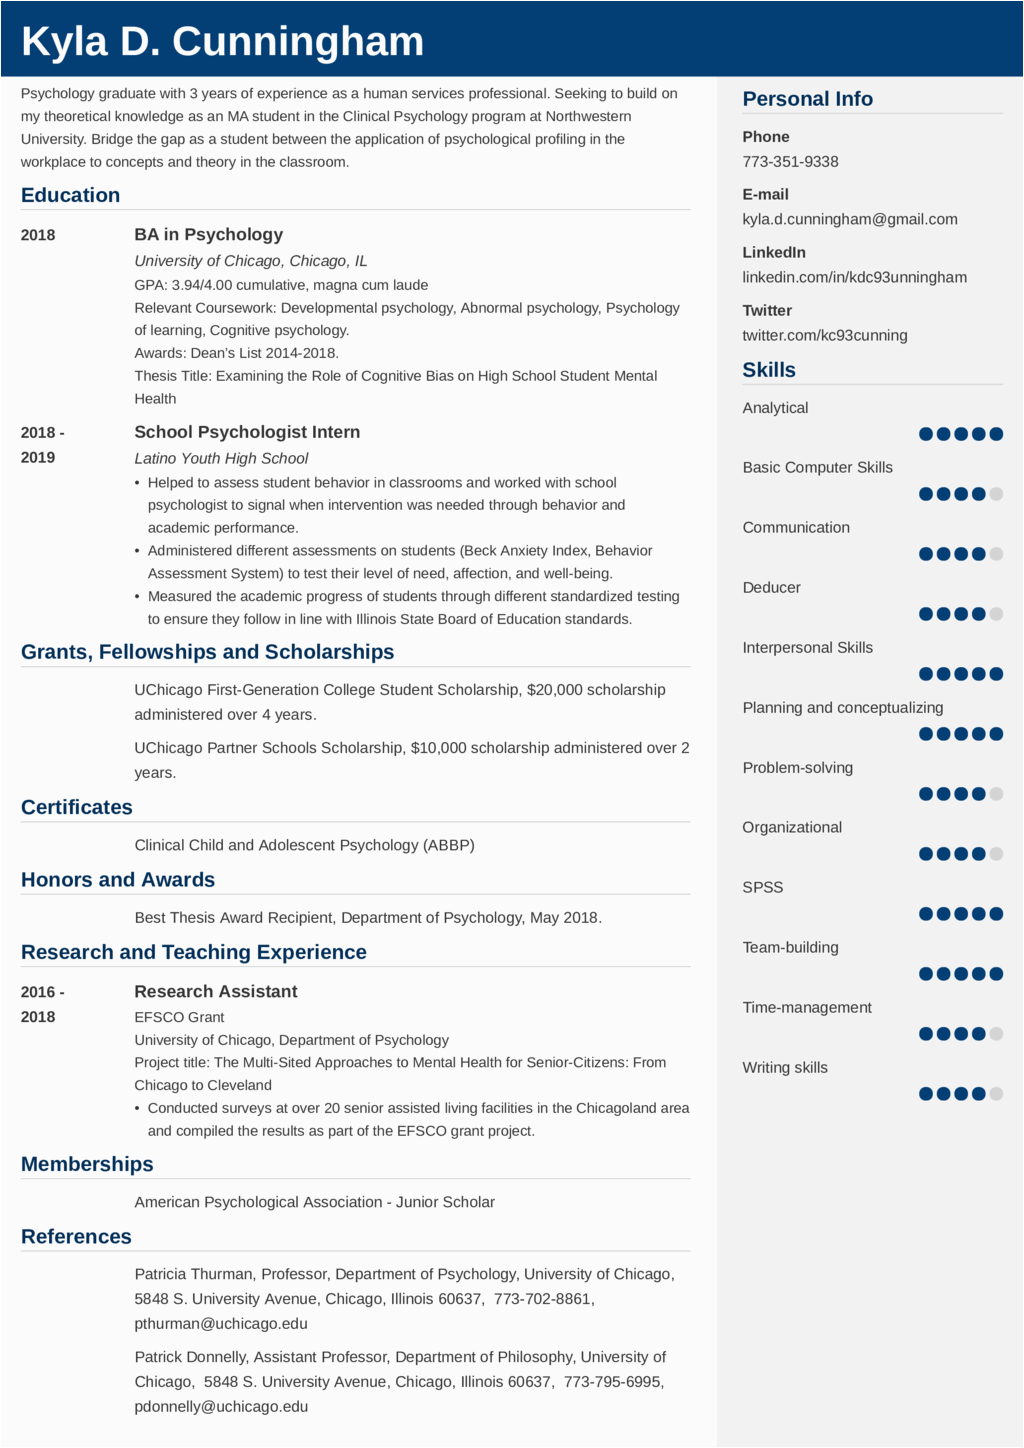 Resume Samples for Admission to Graduate School Grad School Resume Examples with Templates and Writing Tips